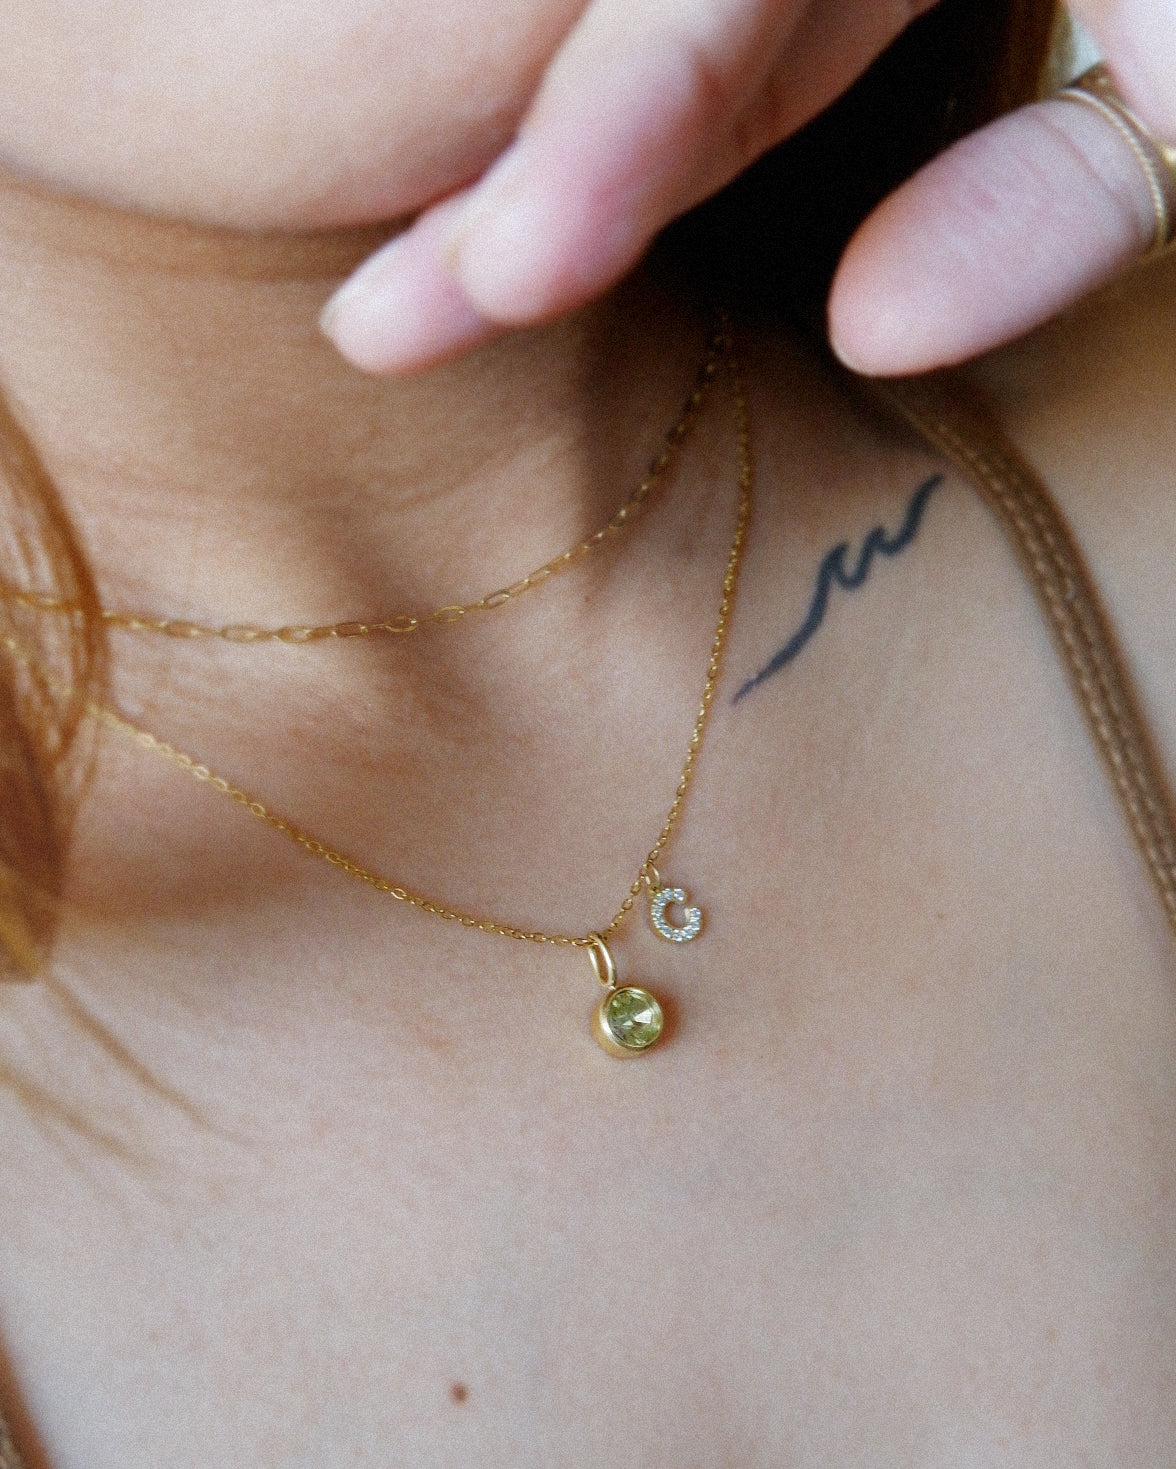 The Pave Initial and Dainty Birthstone Necklace